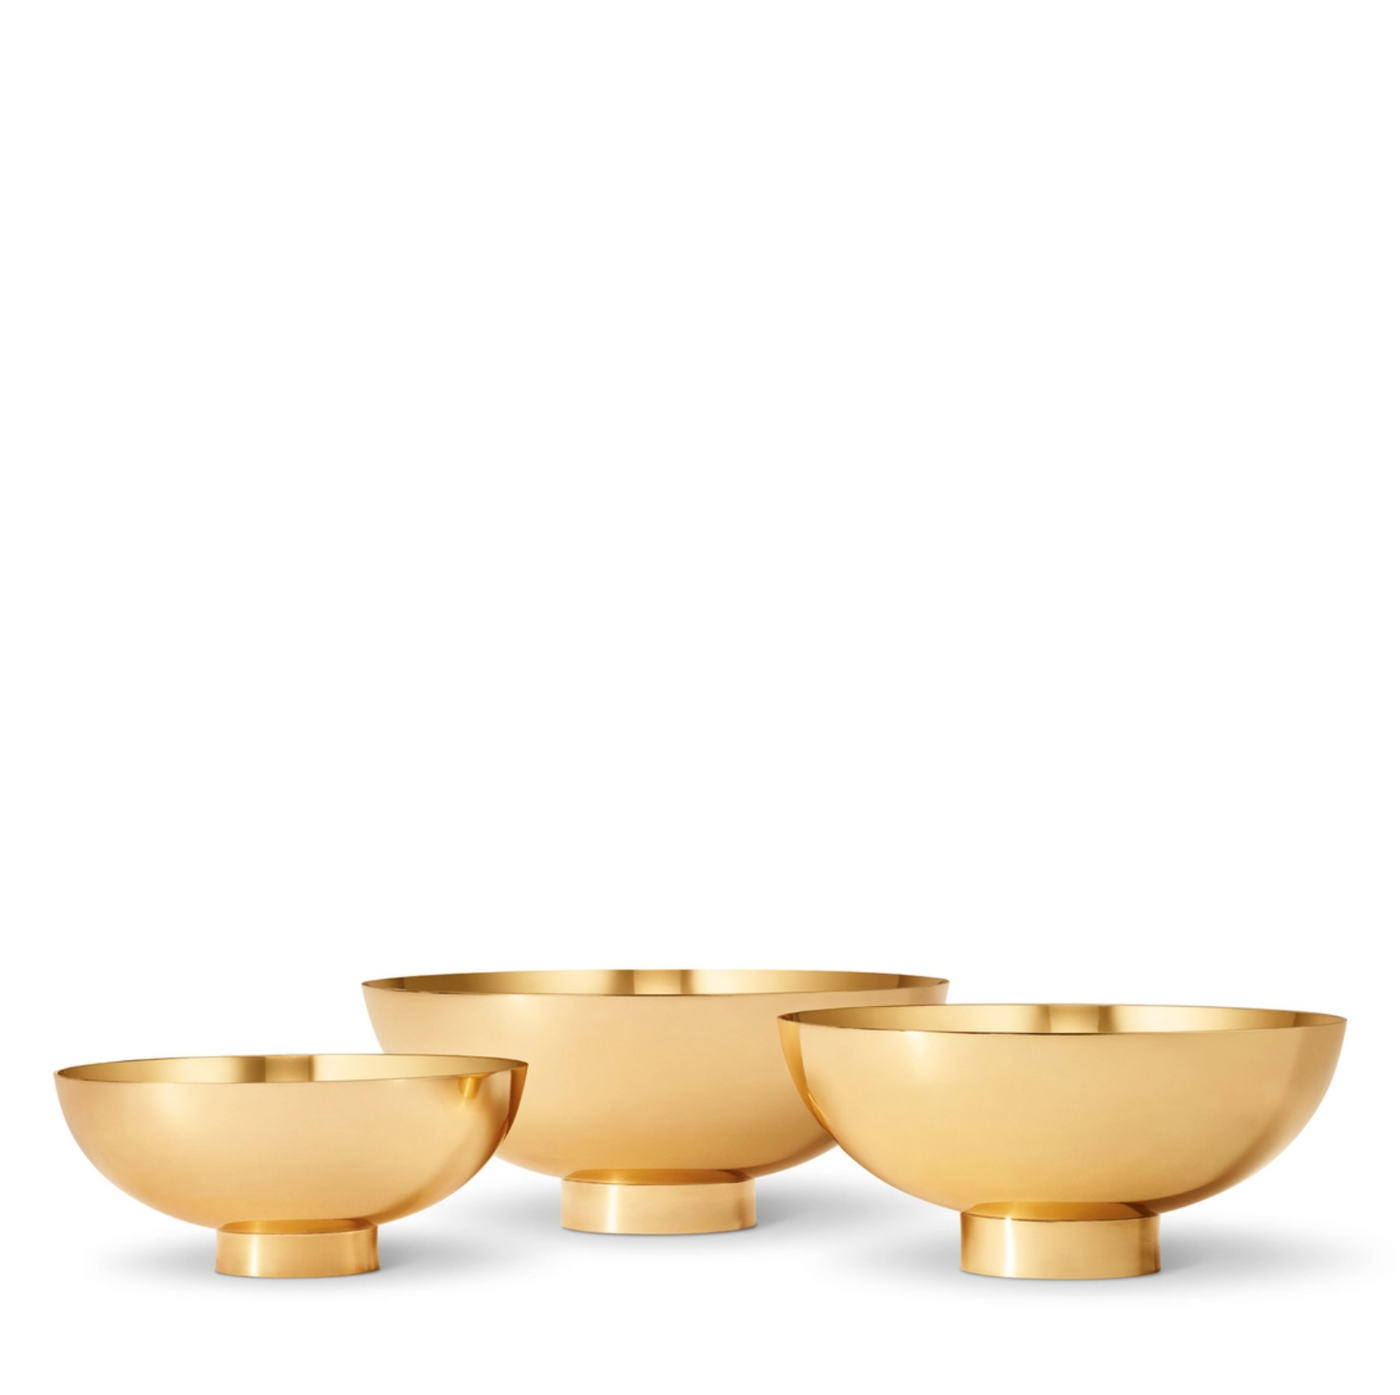 AERIN BOWL SINTRA FOOTED (Available in 3 Sizes)